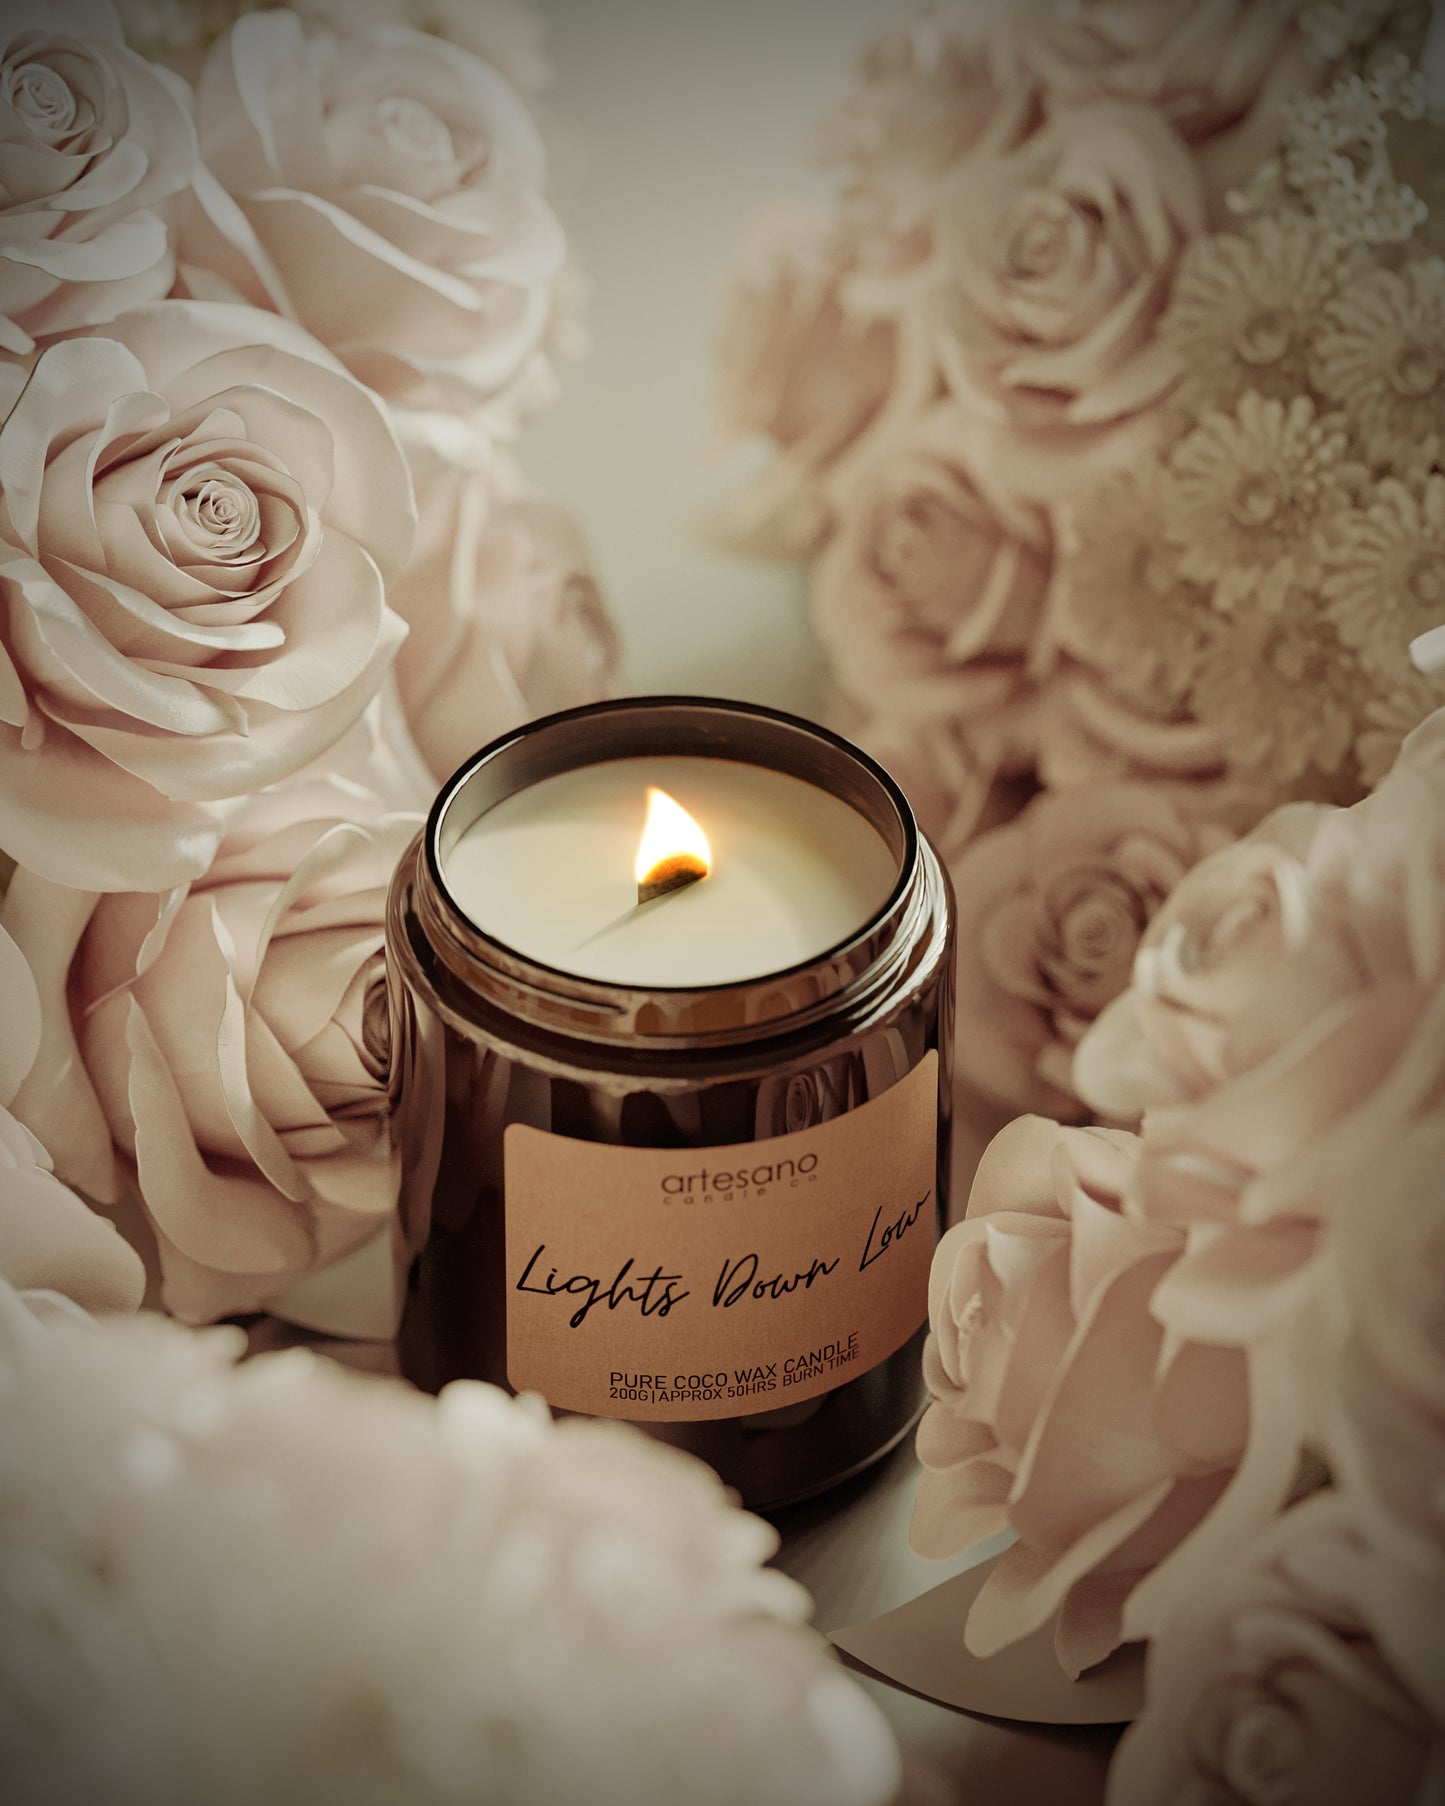 Lights Down Low - Pure Coco Wax Candle